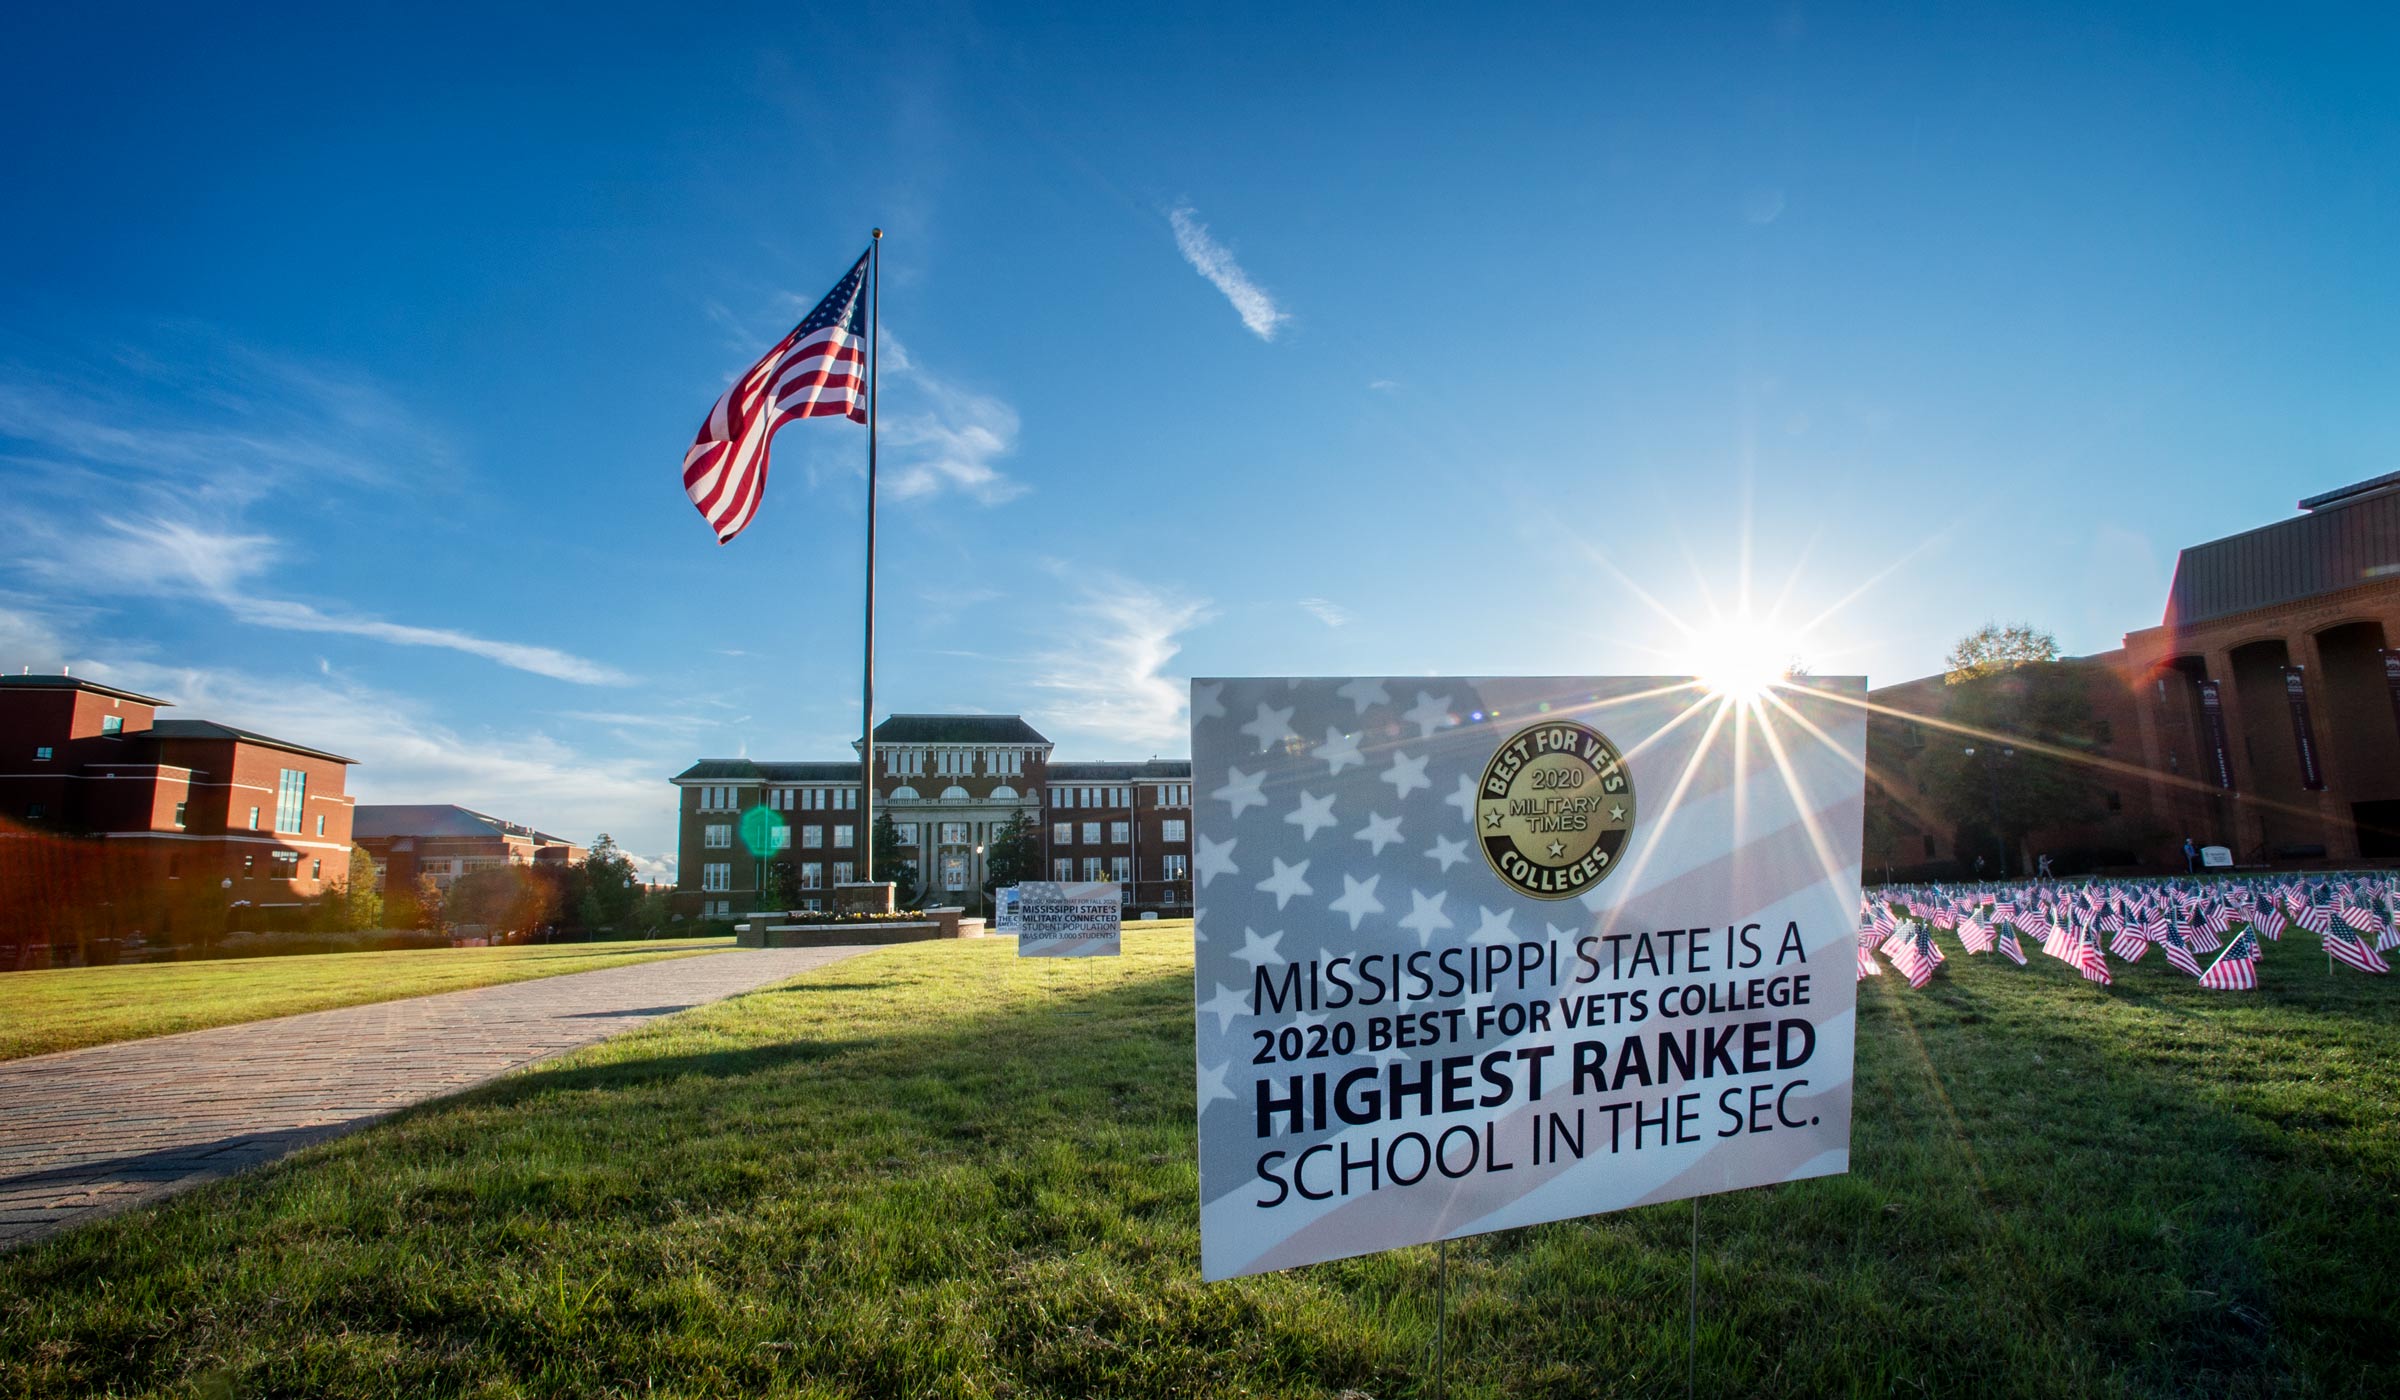 Sunflare backlights sign on Drill Field next to Veterans Day American flags: MSU is a &quot;2020 Best for Vets College Highest Ranked School in the SEC.&quot;